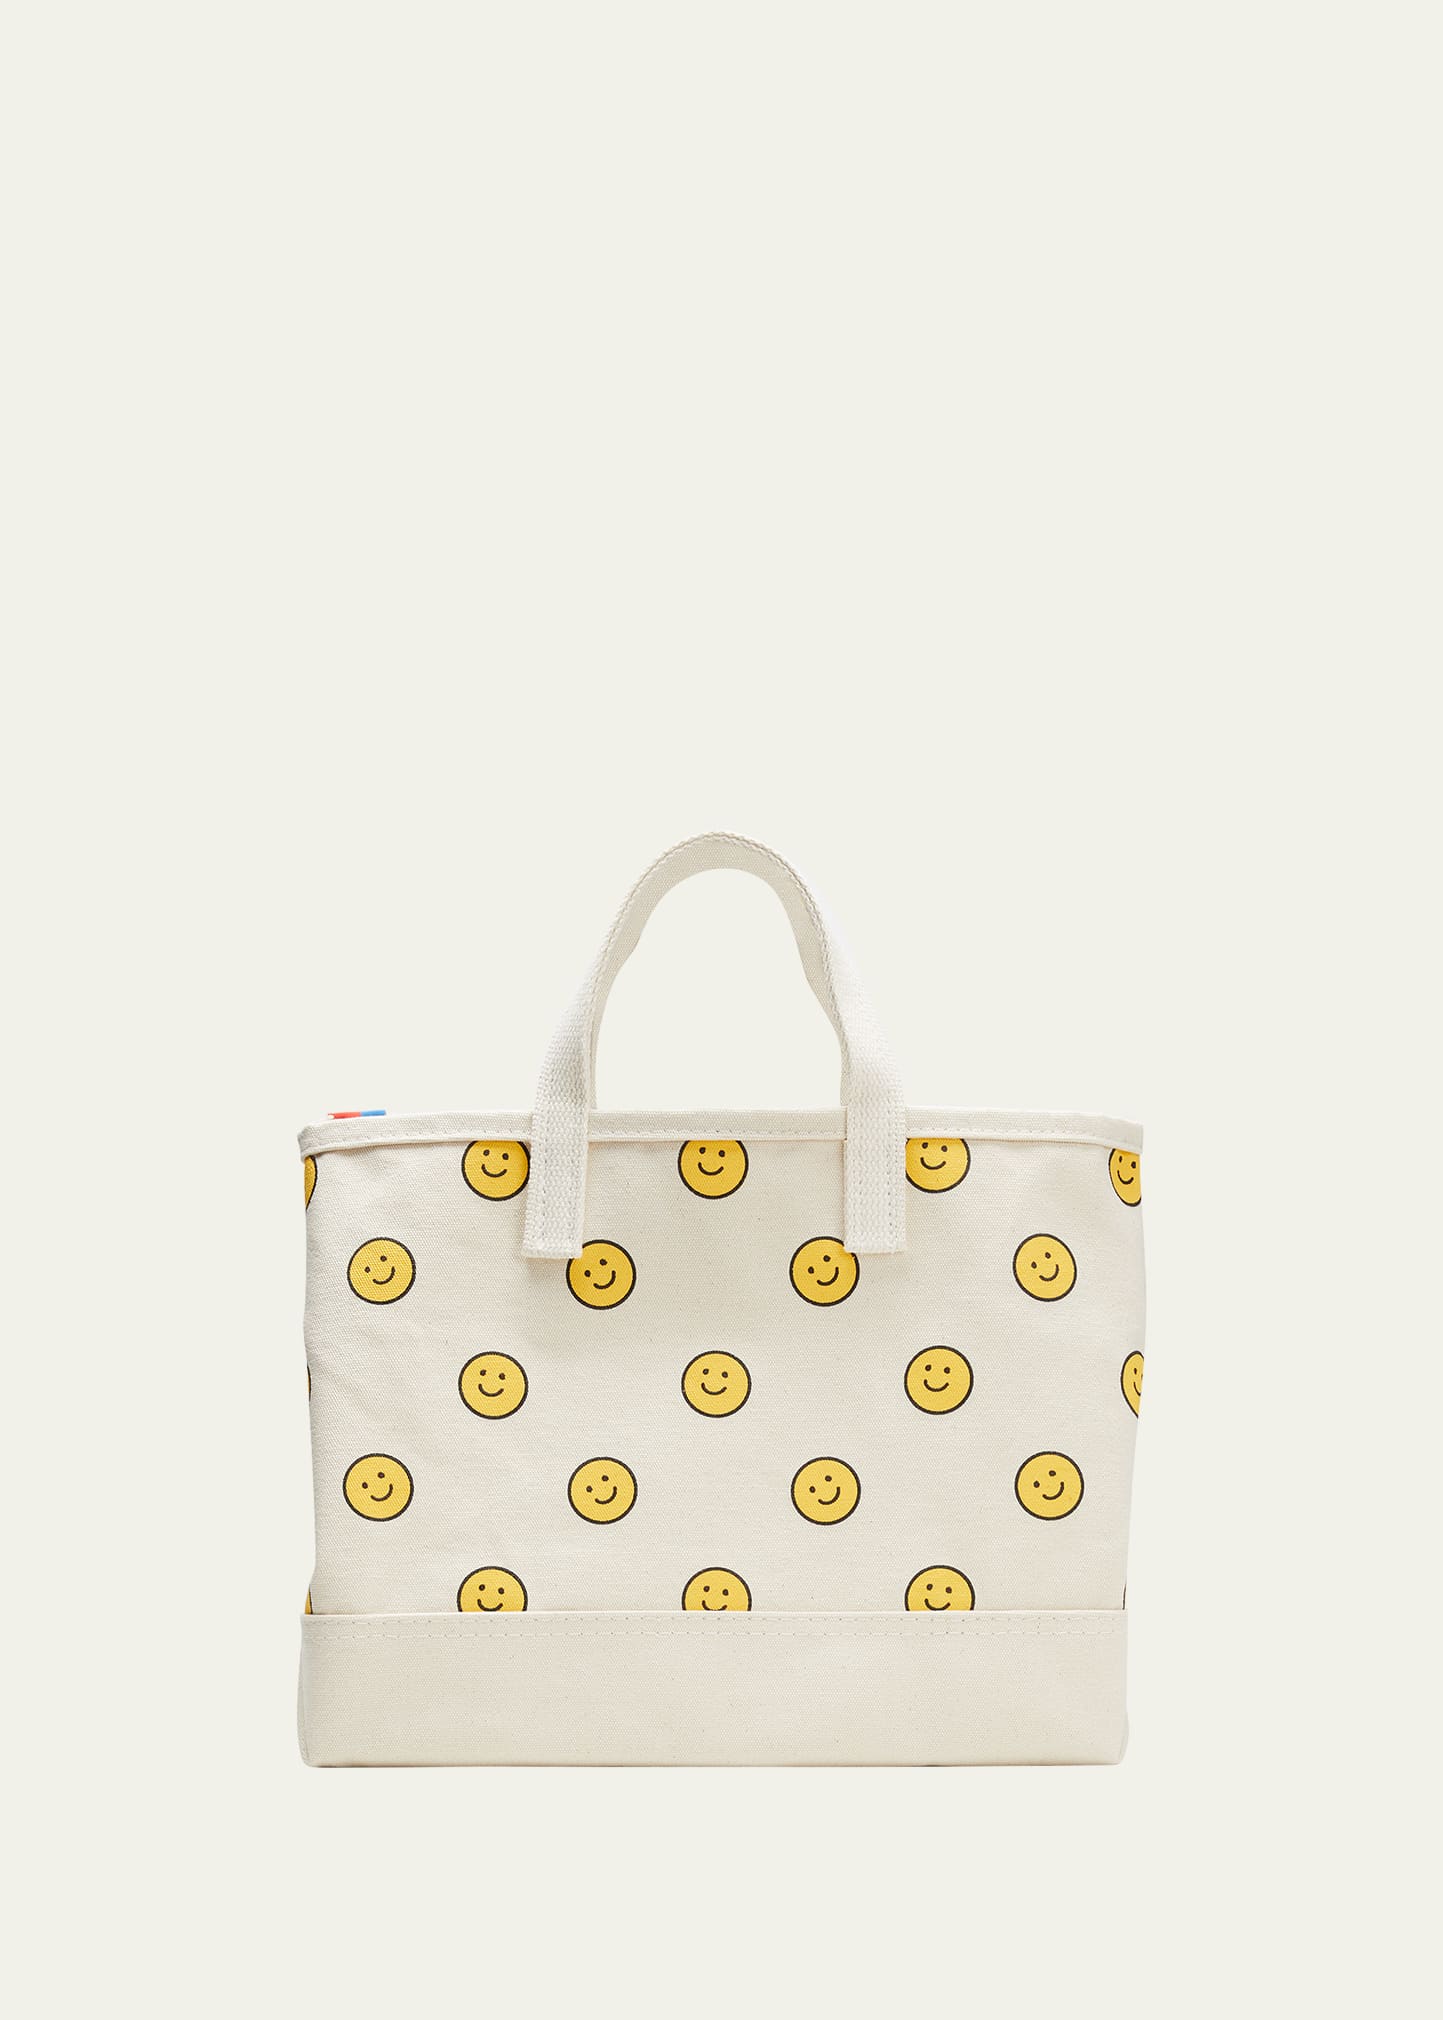 The All Over Smile Medium Tote Bag